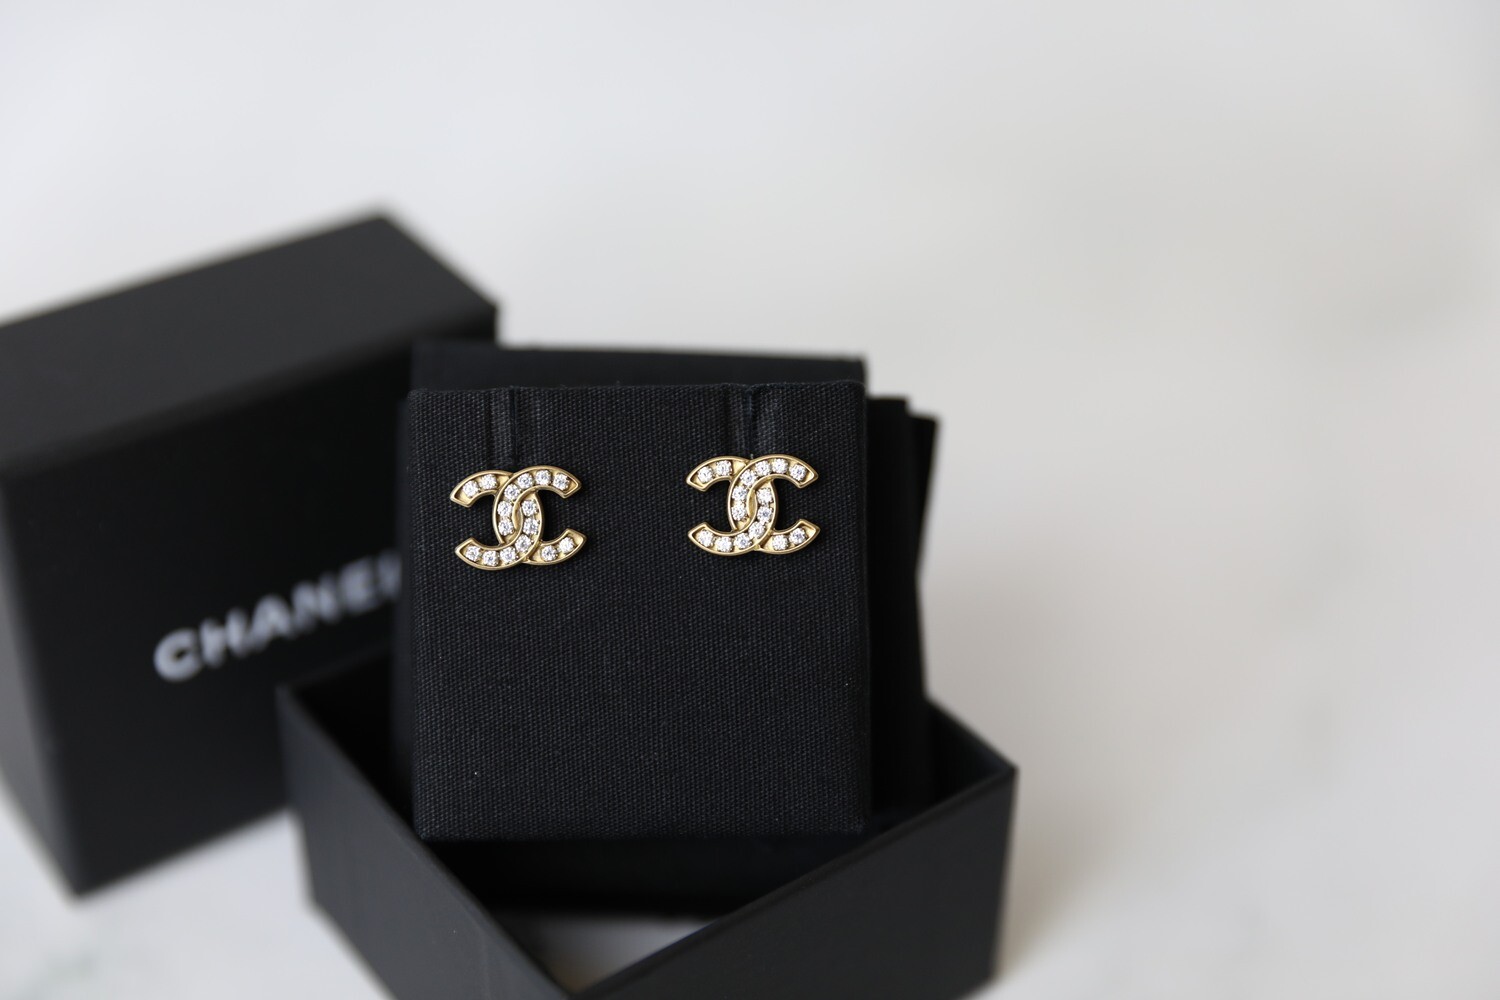 Chanel Stud Earrings, Gold with Crystal Inlay, Preowned in Box WA001